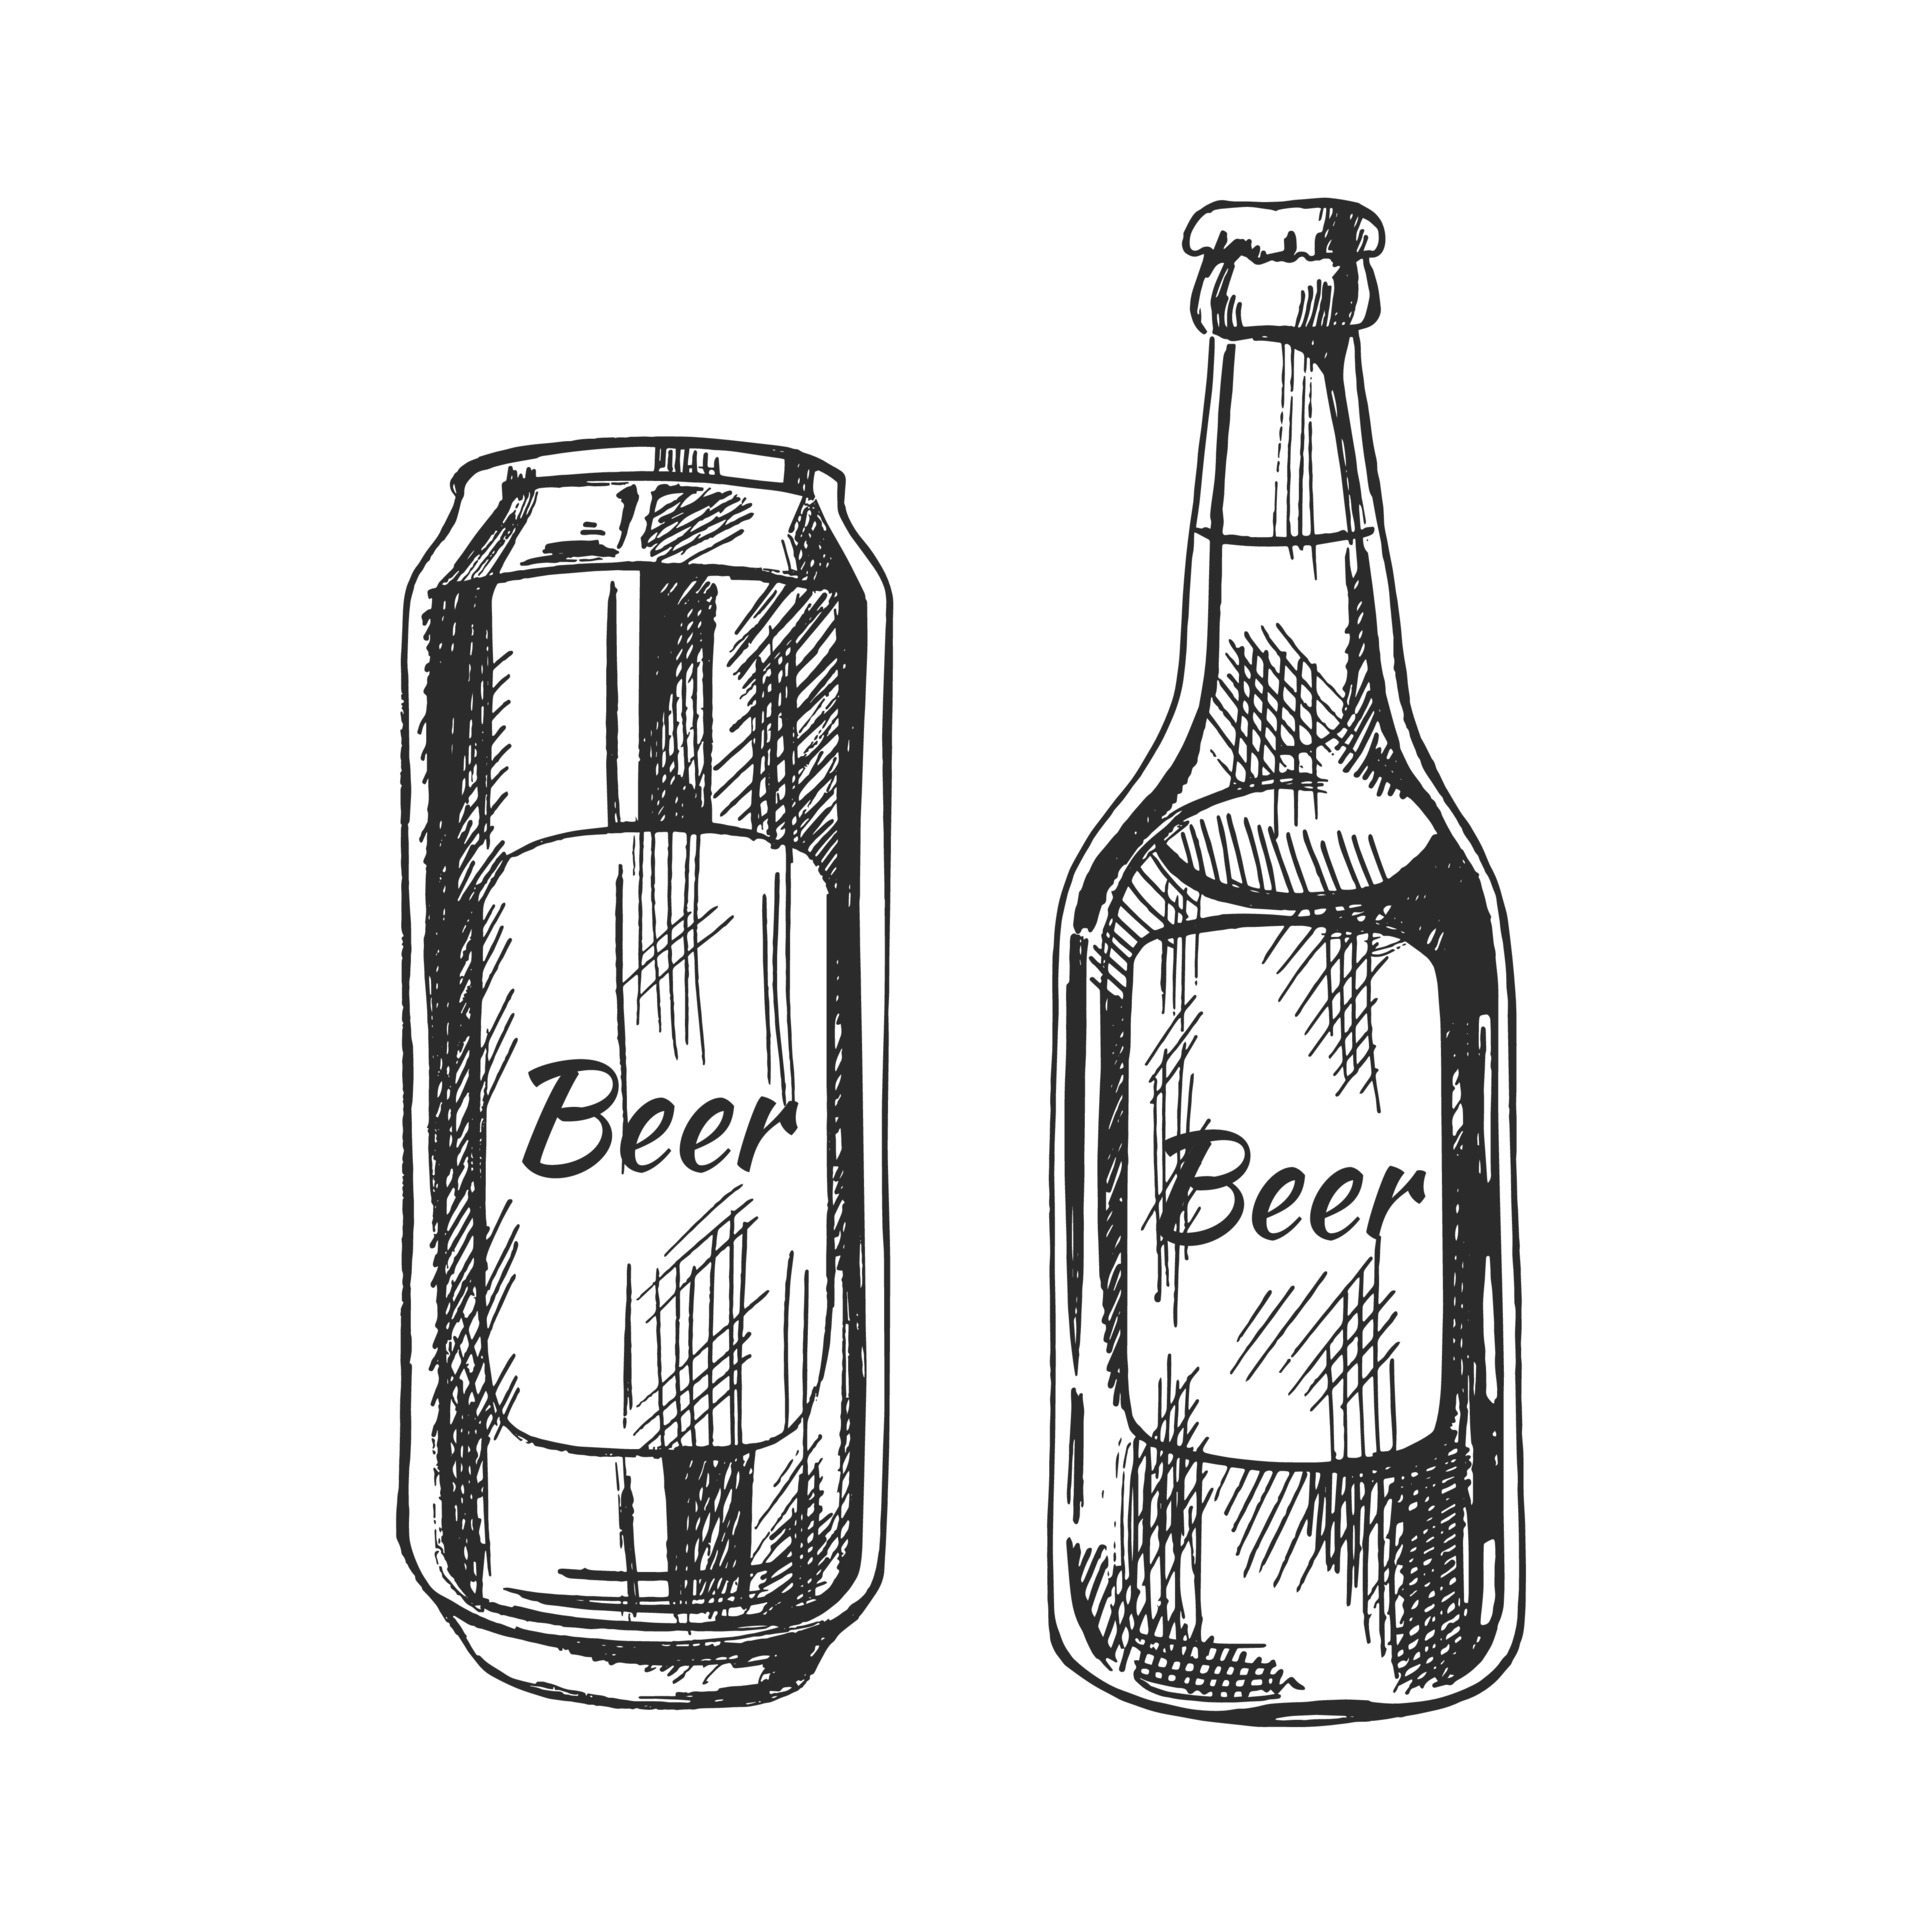 Beer Bottle Drawings for Sale (Page #2 of 4) - Fine Art America